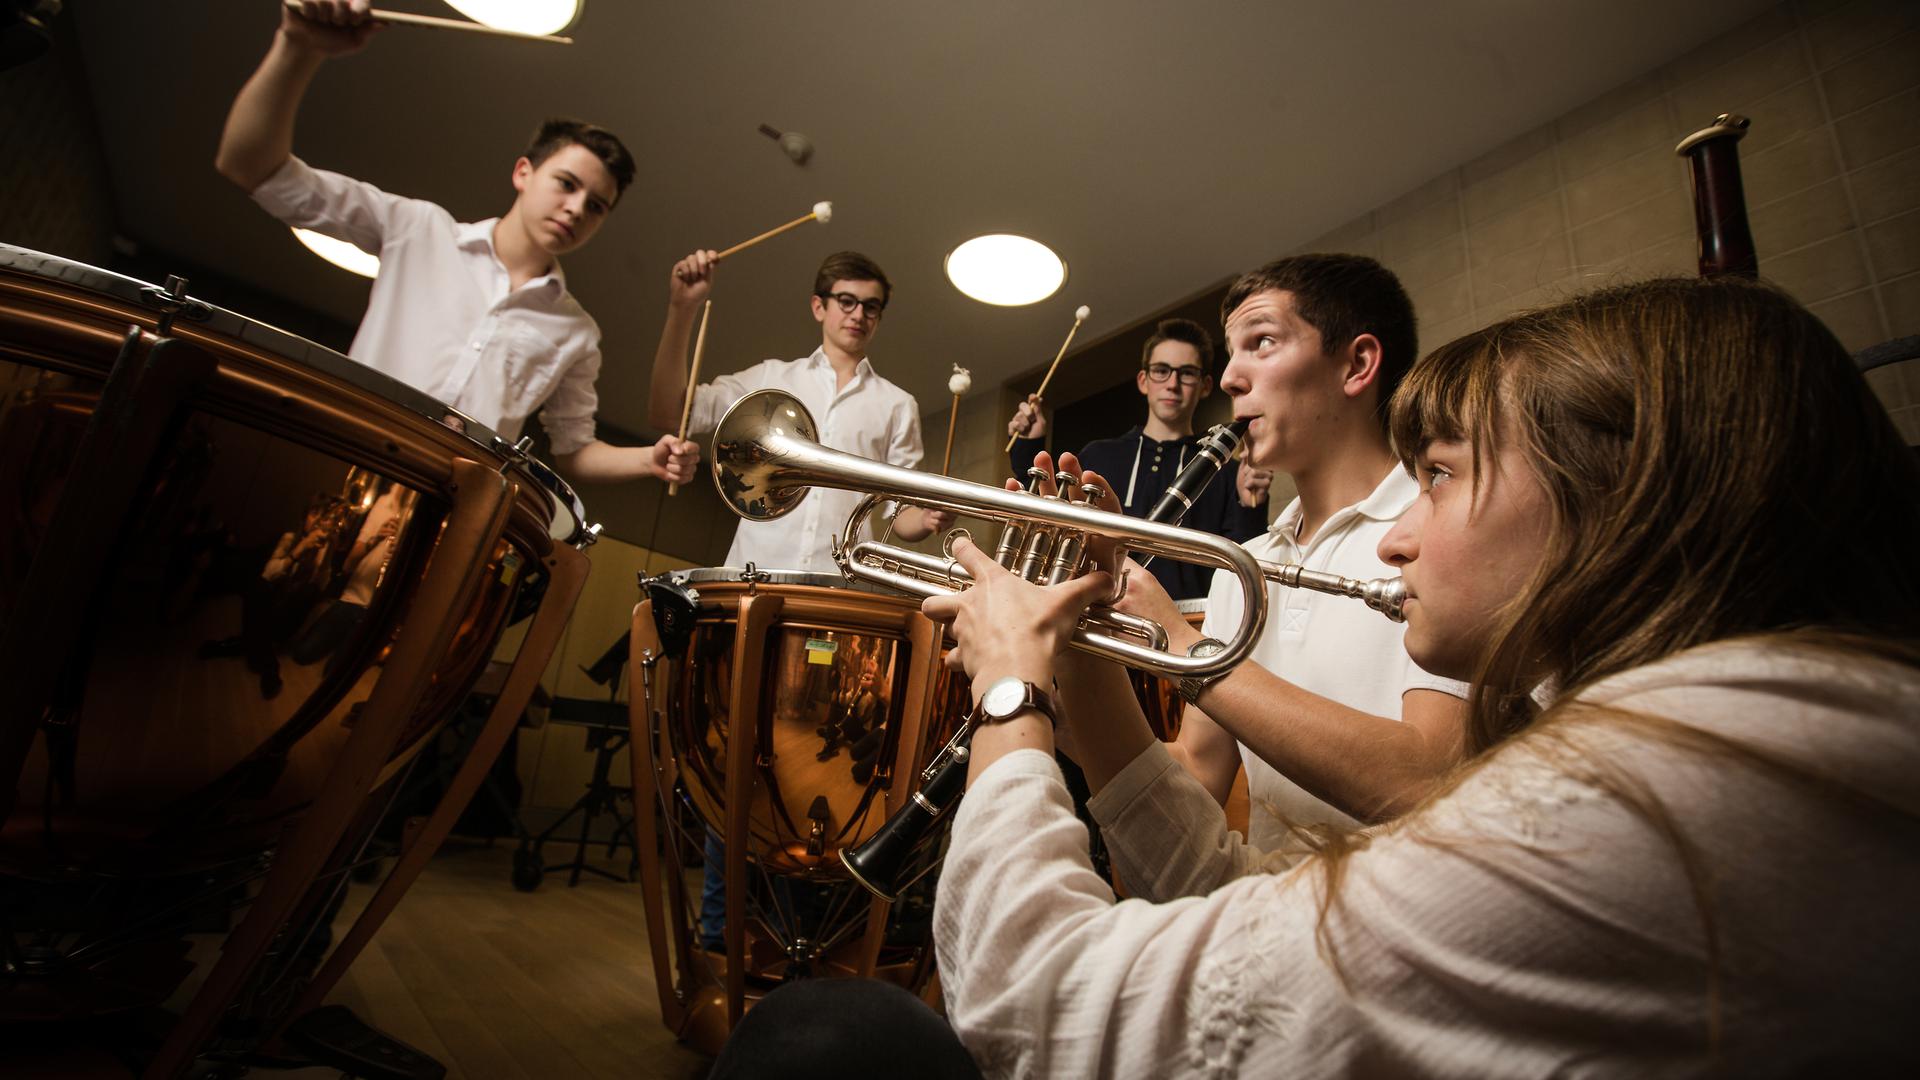 The Luxembourg Conservatory teaches music to some 2,500 students 